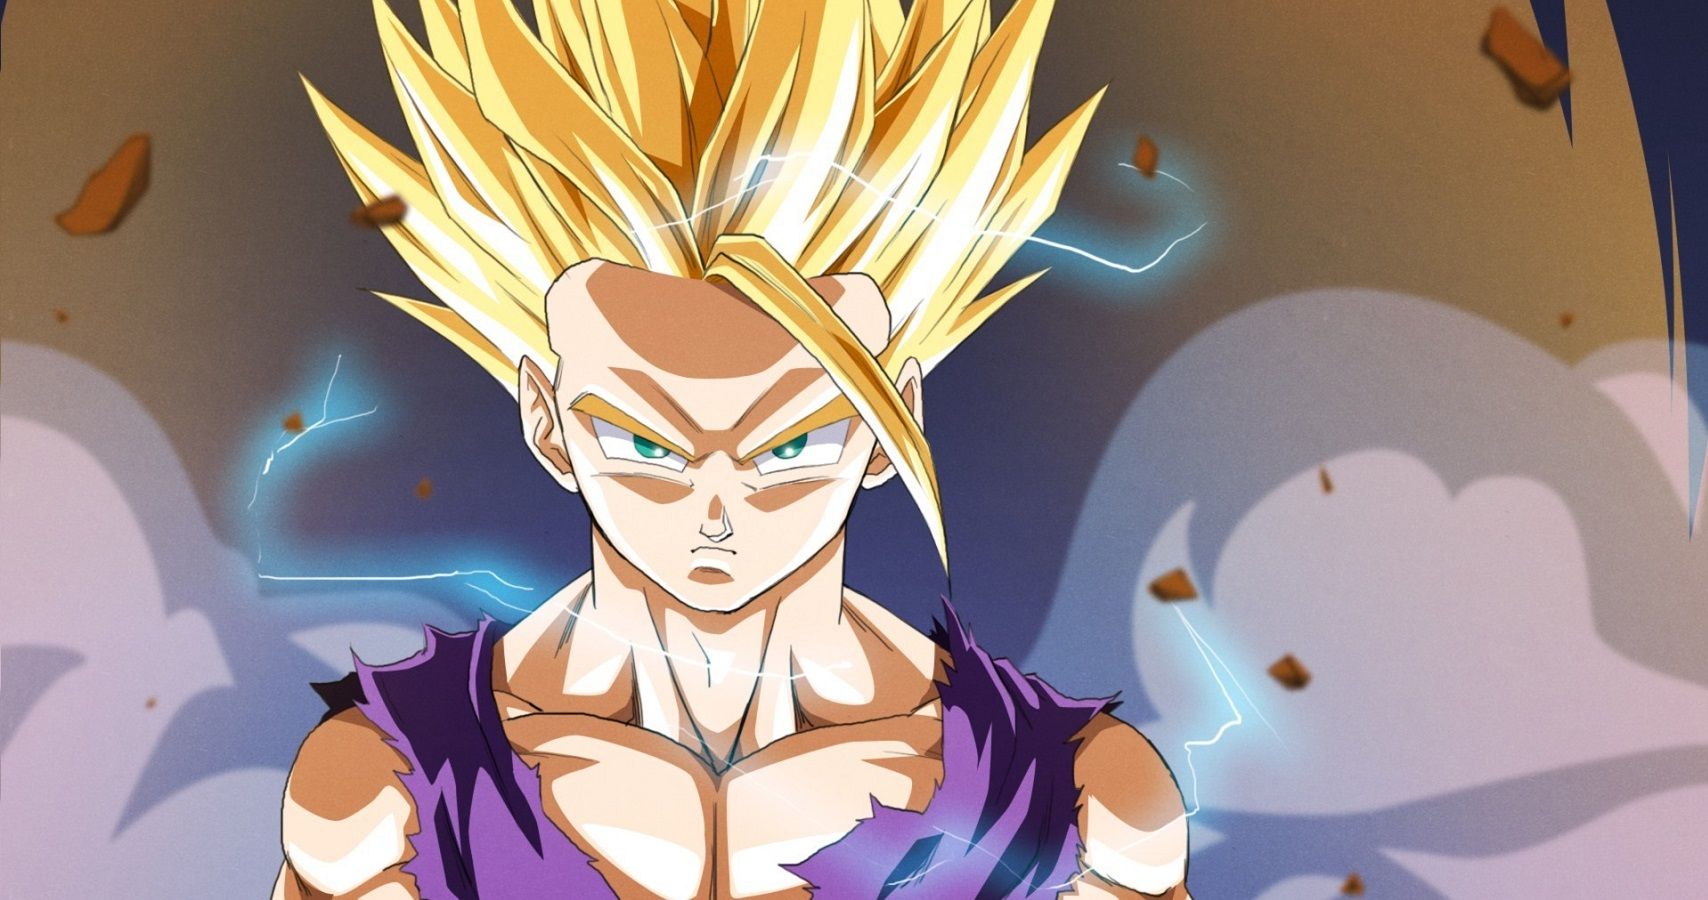 What is the difference between Super Saiyan 1 Vegeta and Super